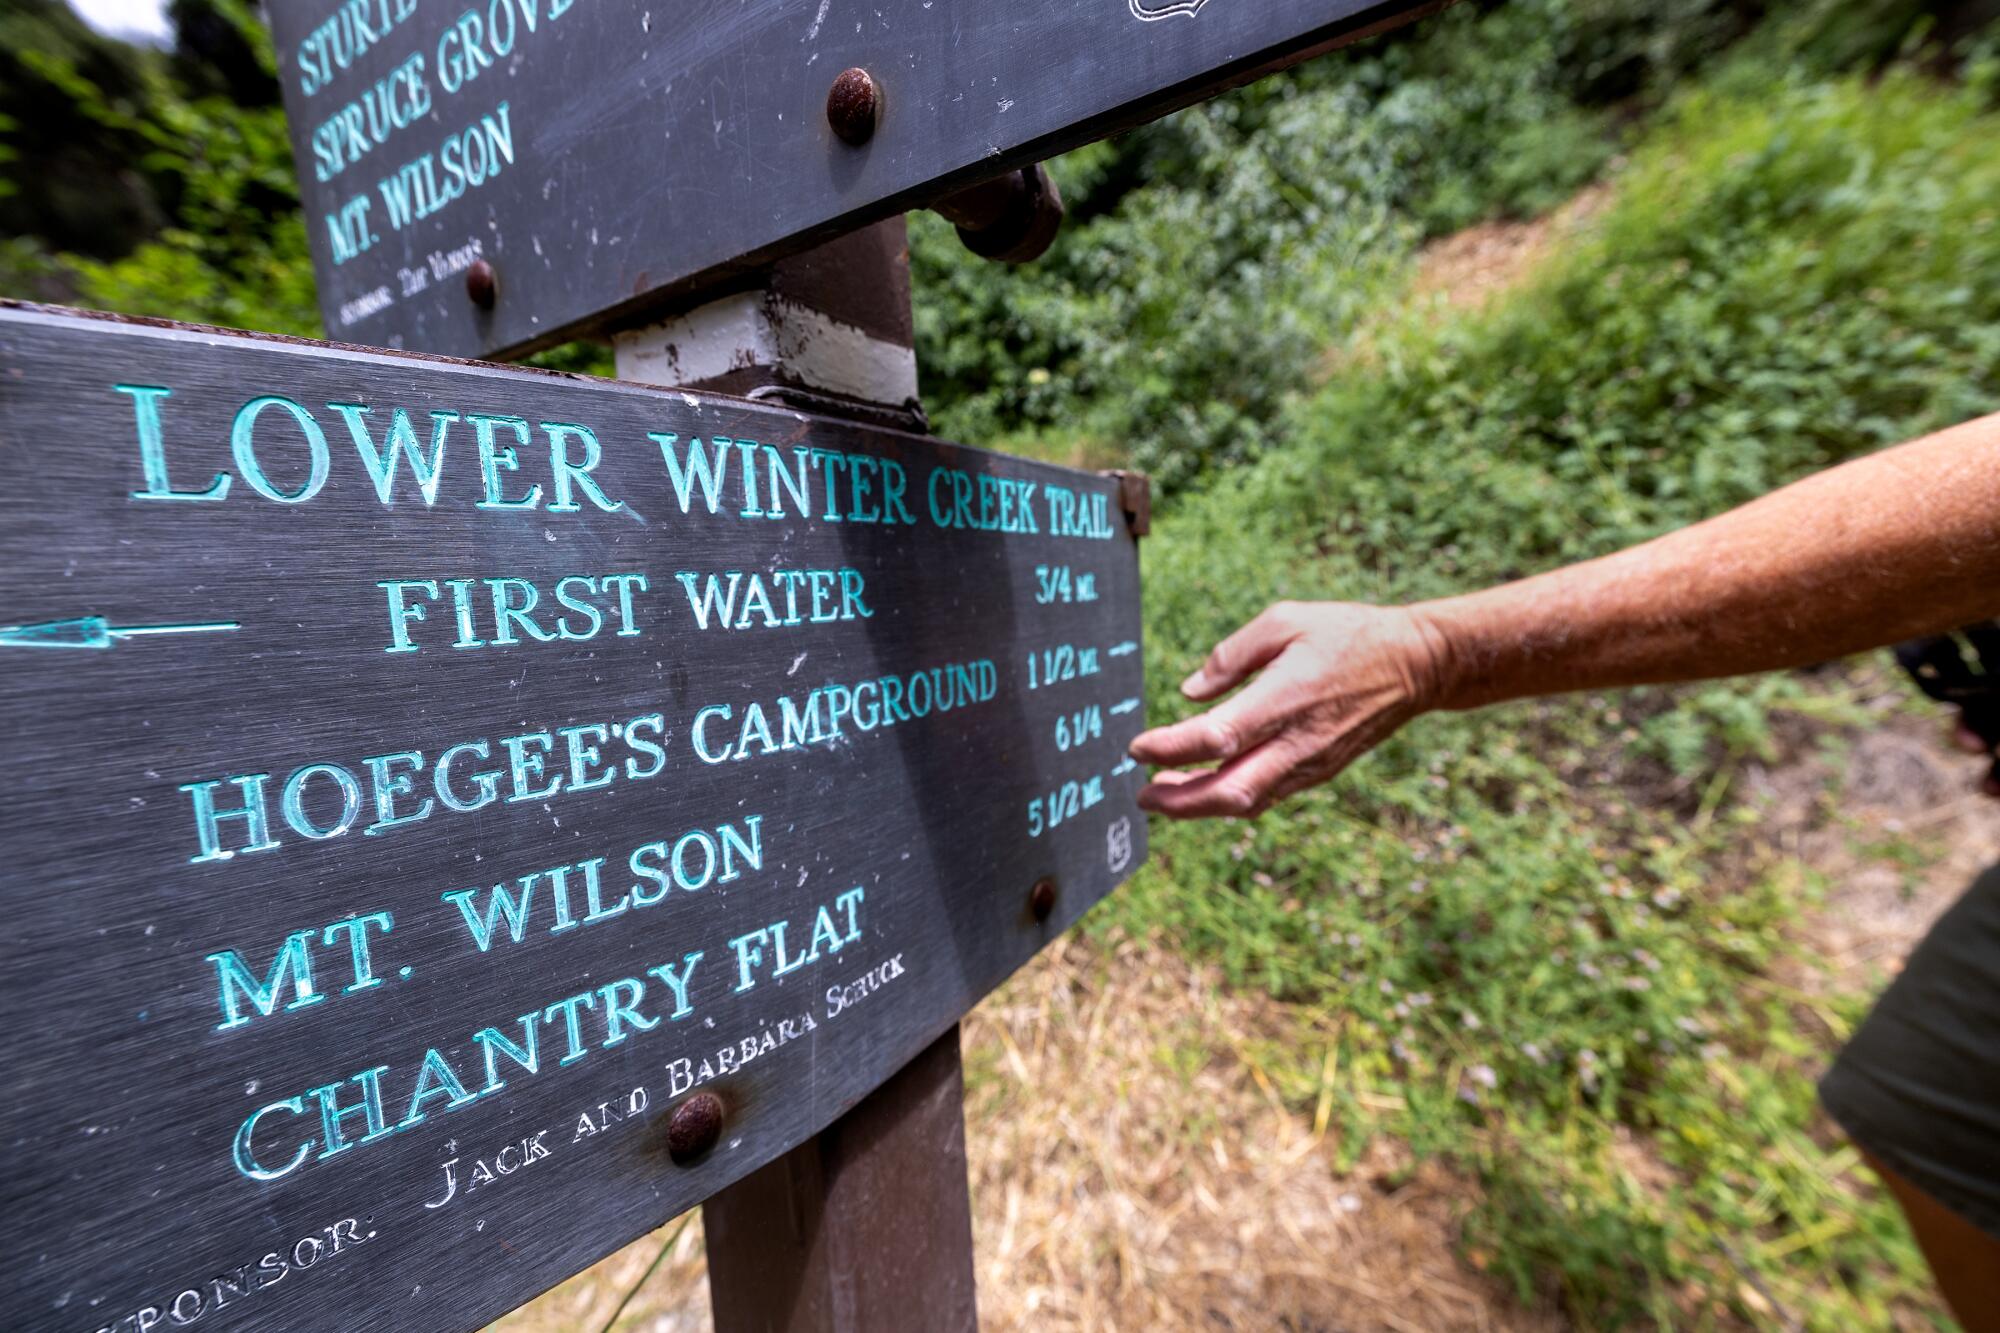 A trail sign shows distances to Hoegee's Campground, Mt. Wilson and Chantry Flat.